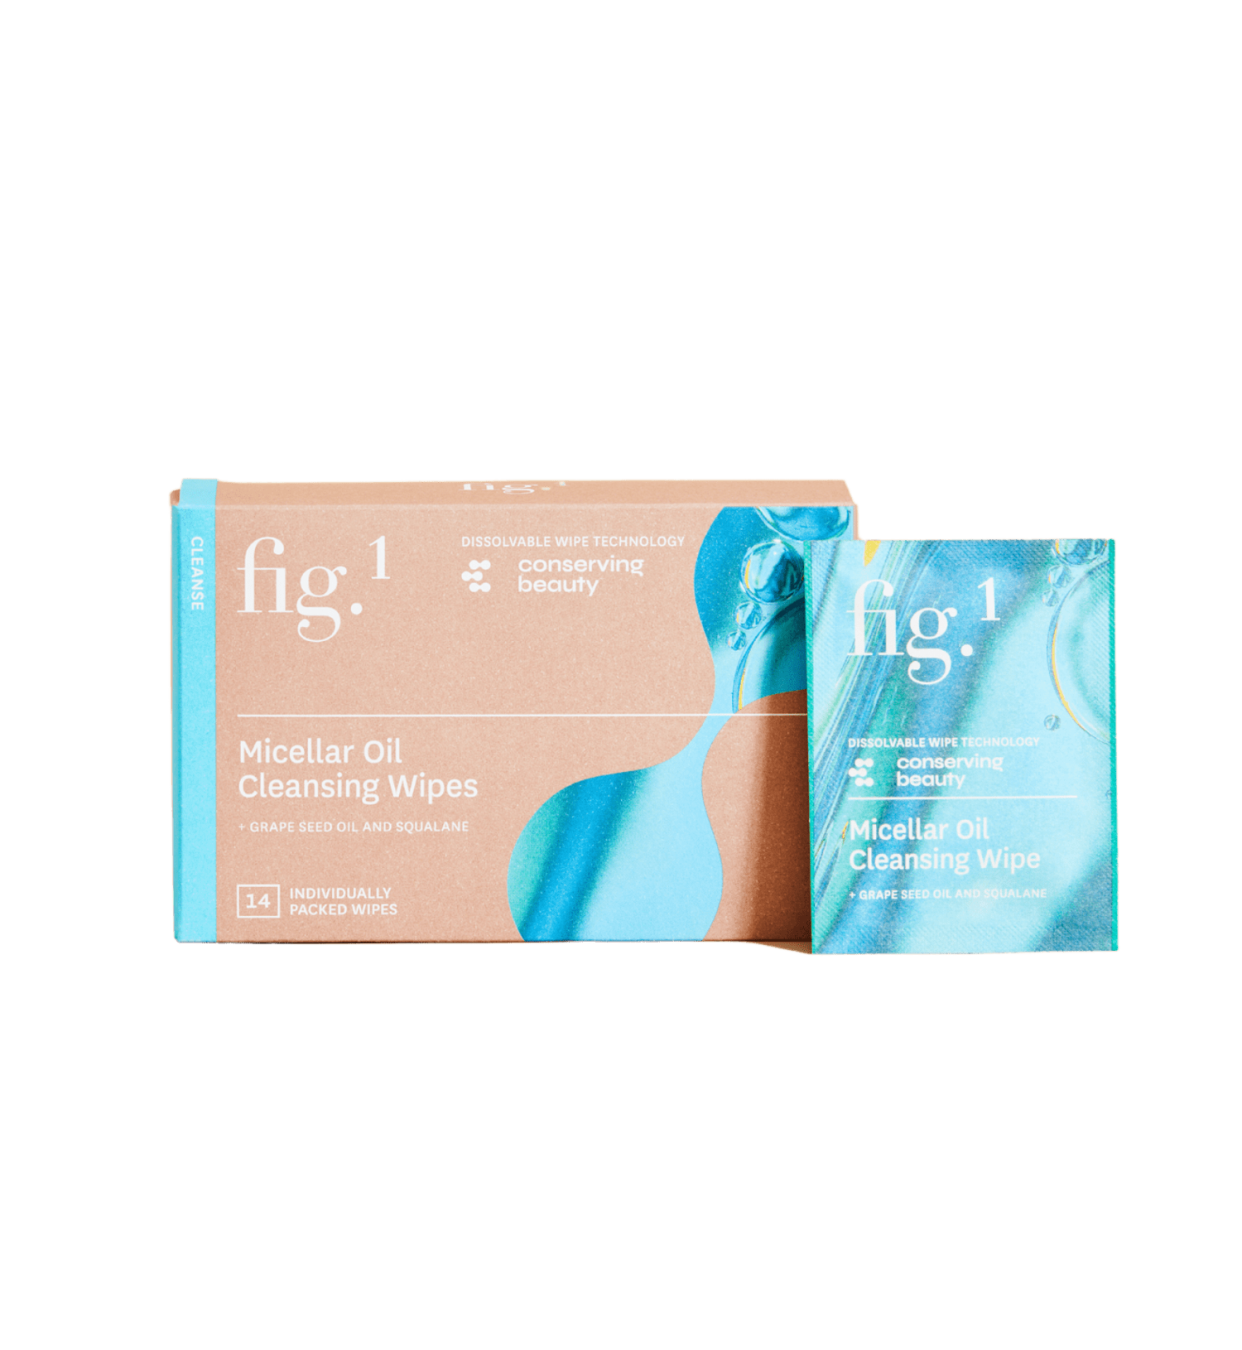 Micellar Oil Cleansing Wipes (DIFFBOT)